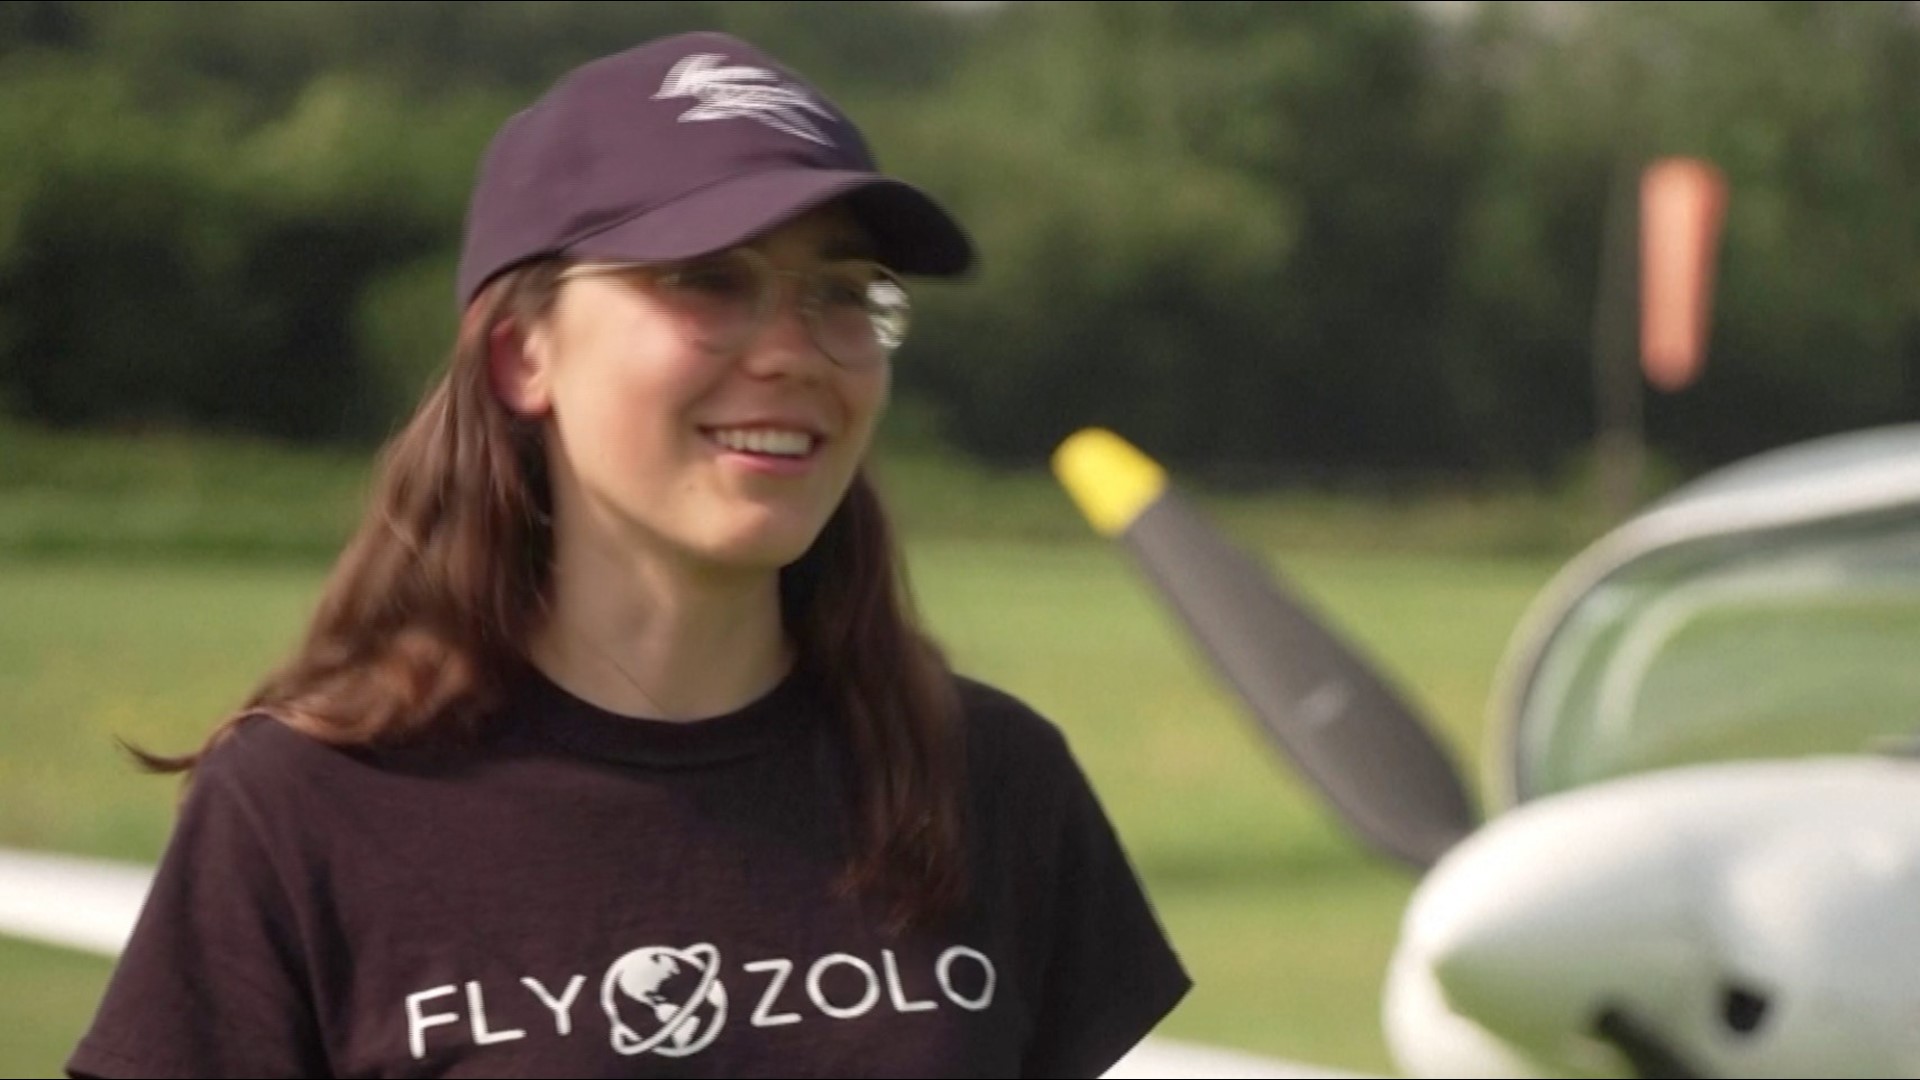 Zara Rutherford is going to attempt to be the youngest woman to fly solo around the world. Buzz60's Keri Lumm has more.